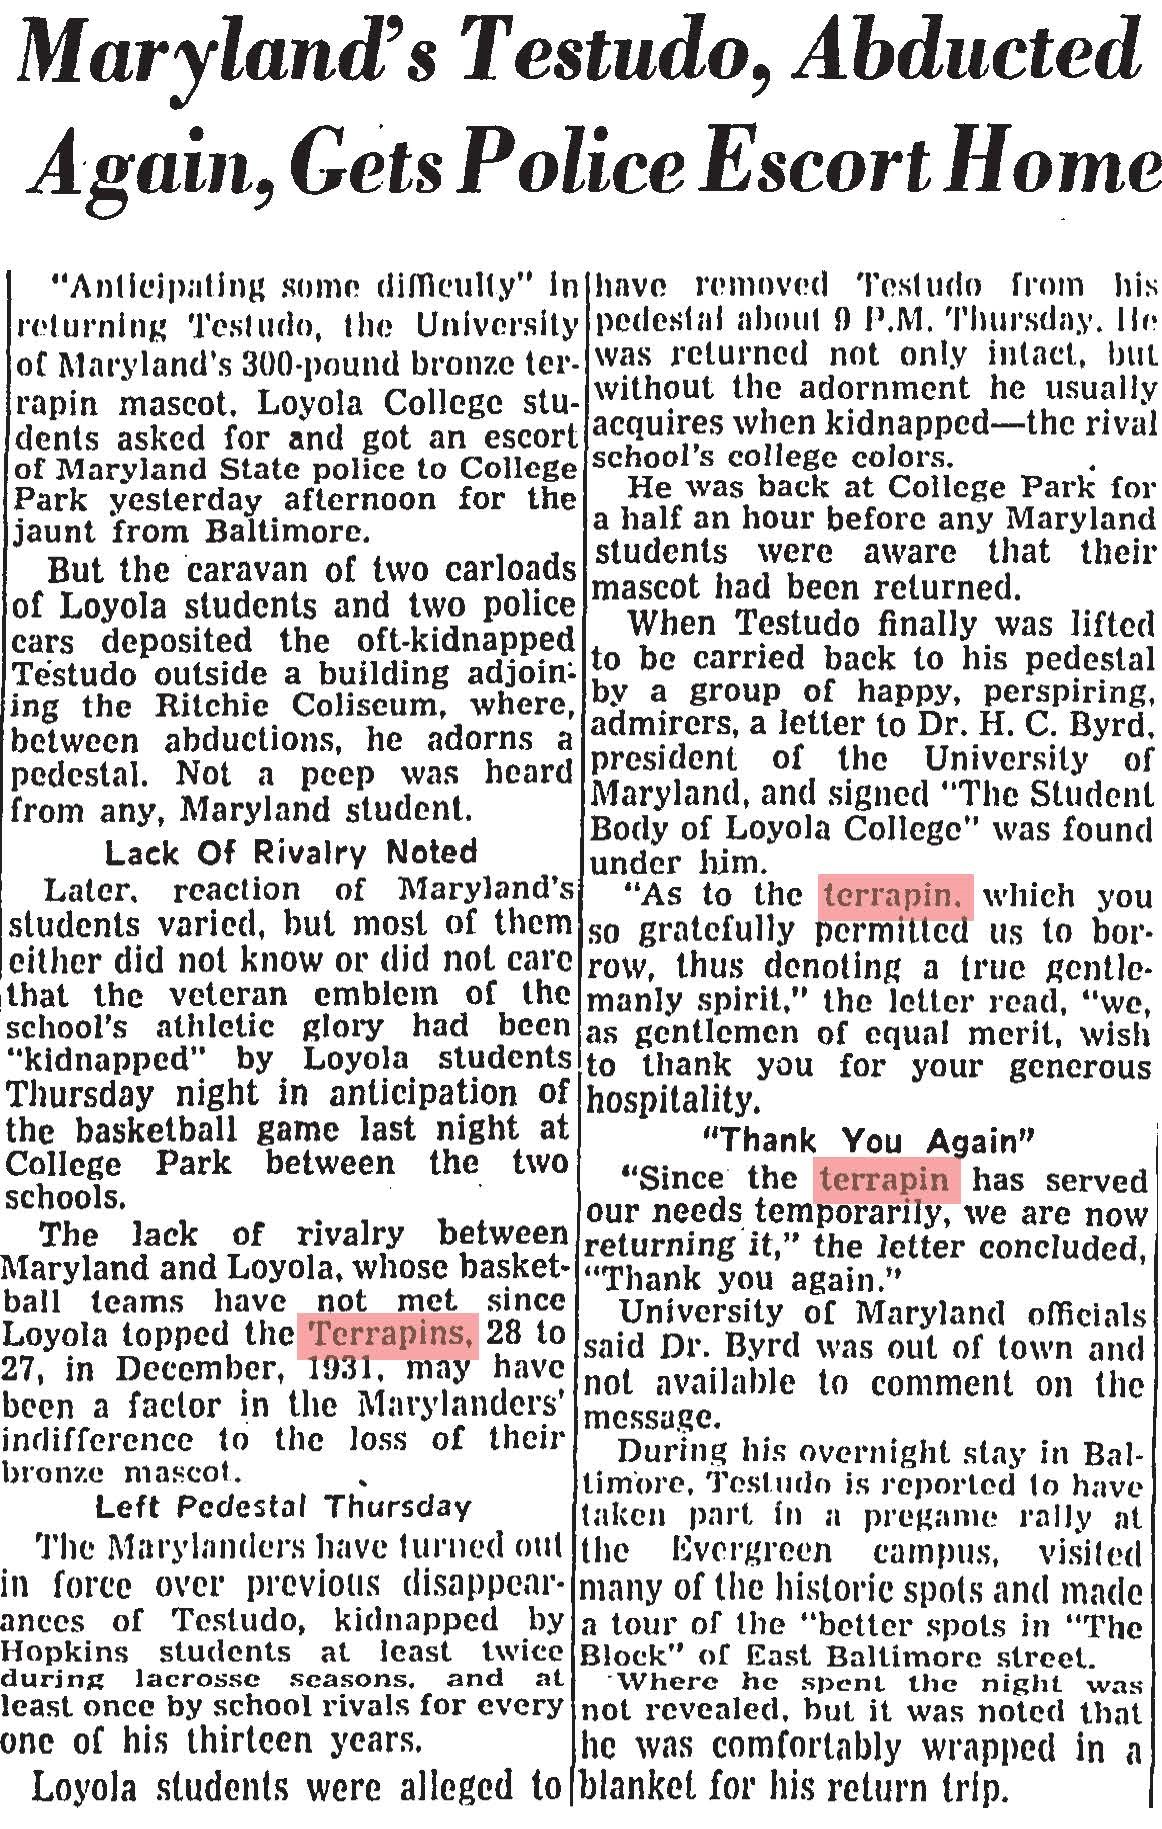 Maryland's Testudo, Abducted Again, Gets Police Escort Home - Sun - Dec 13, 1947